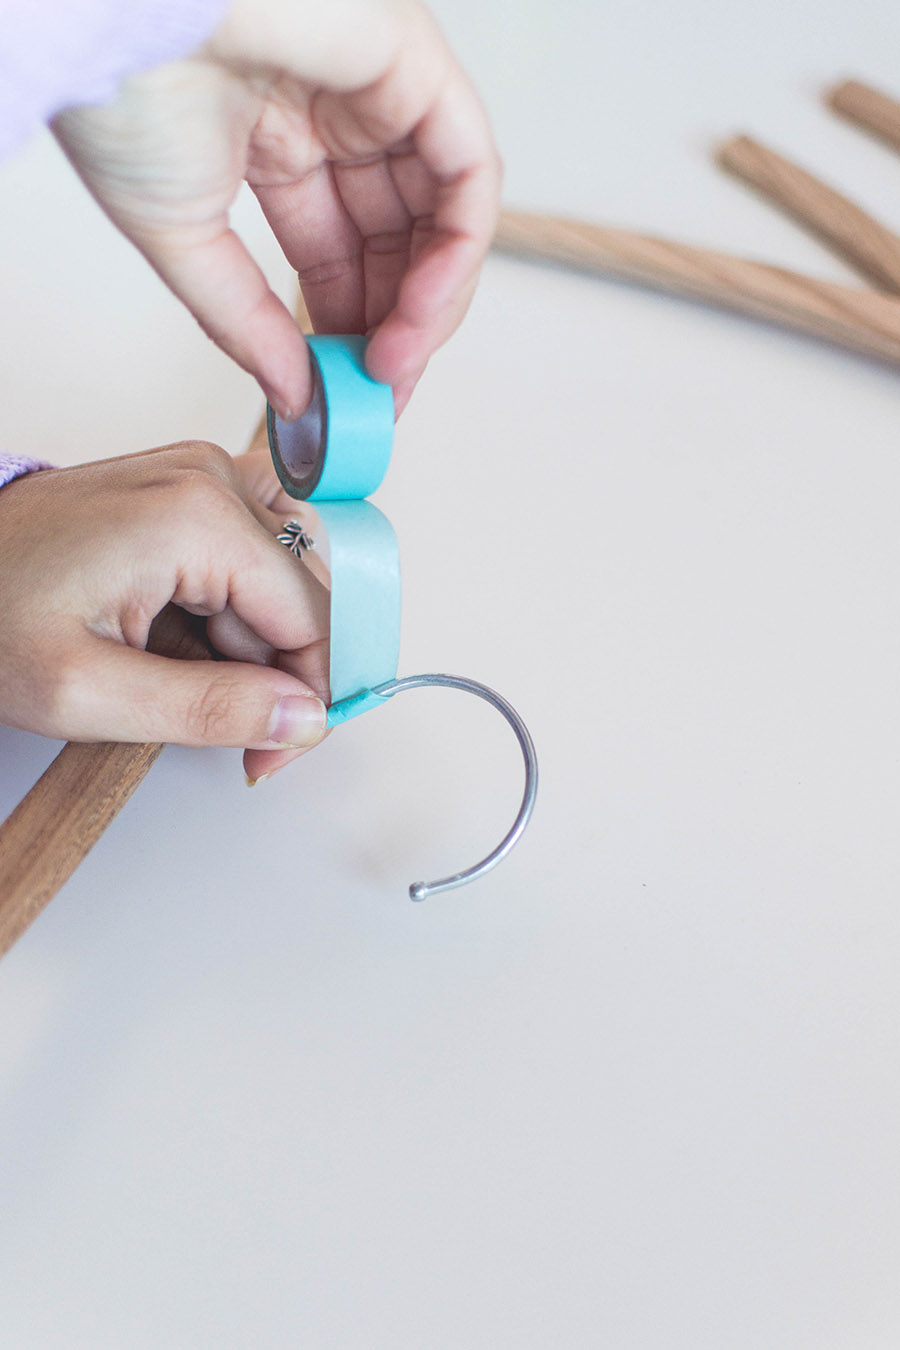 DIY rose gold hangers how-to: cover the hooks with washi tape